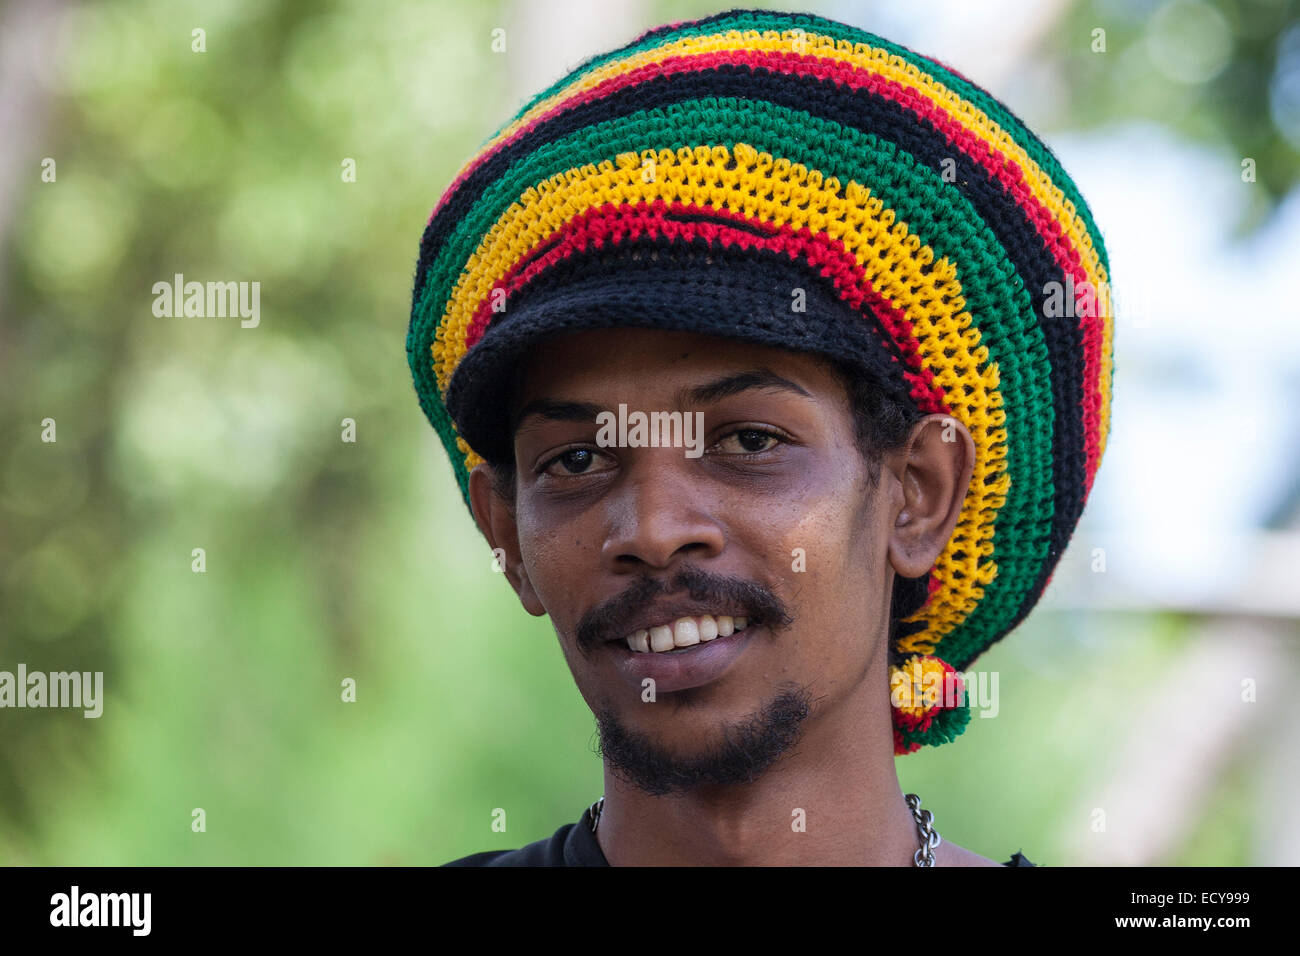 Rasta Hat High Resolution Stock Photography and Images -